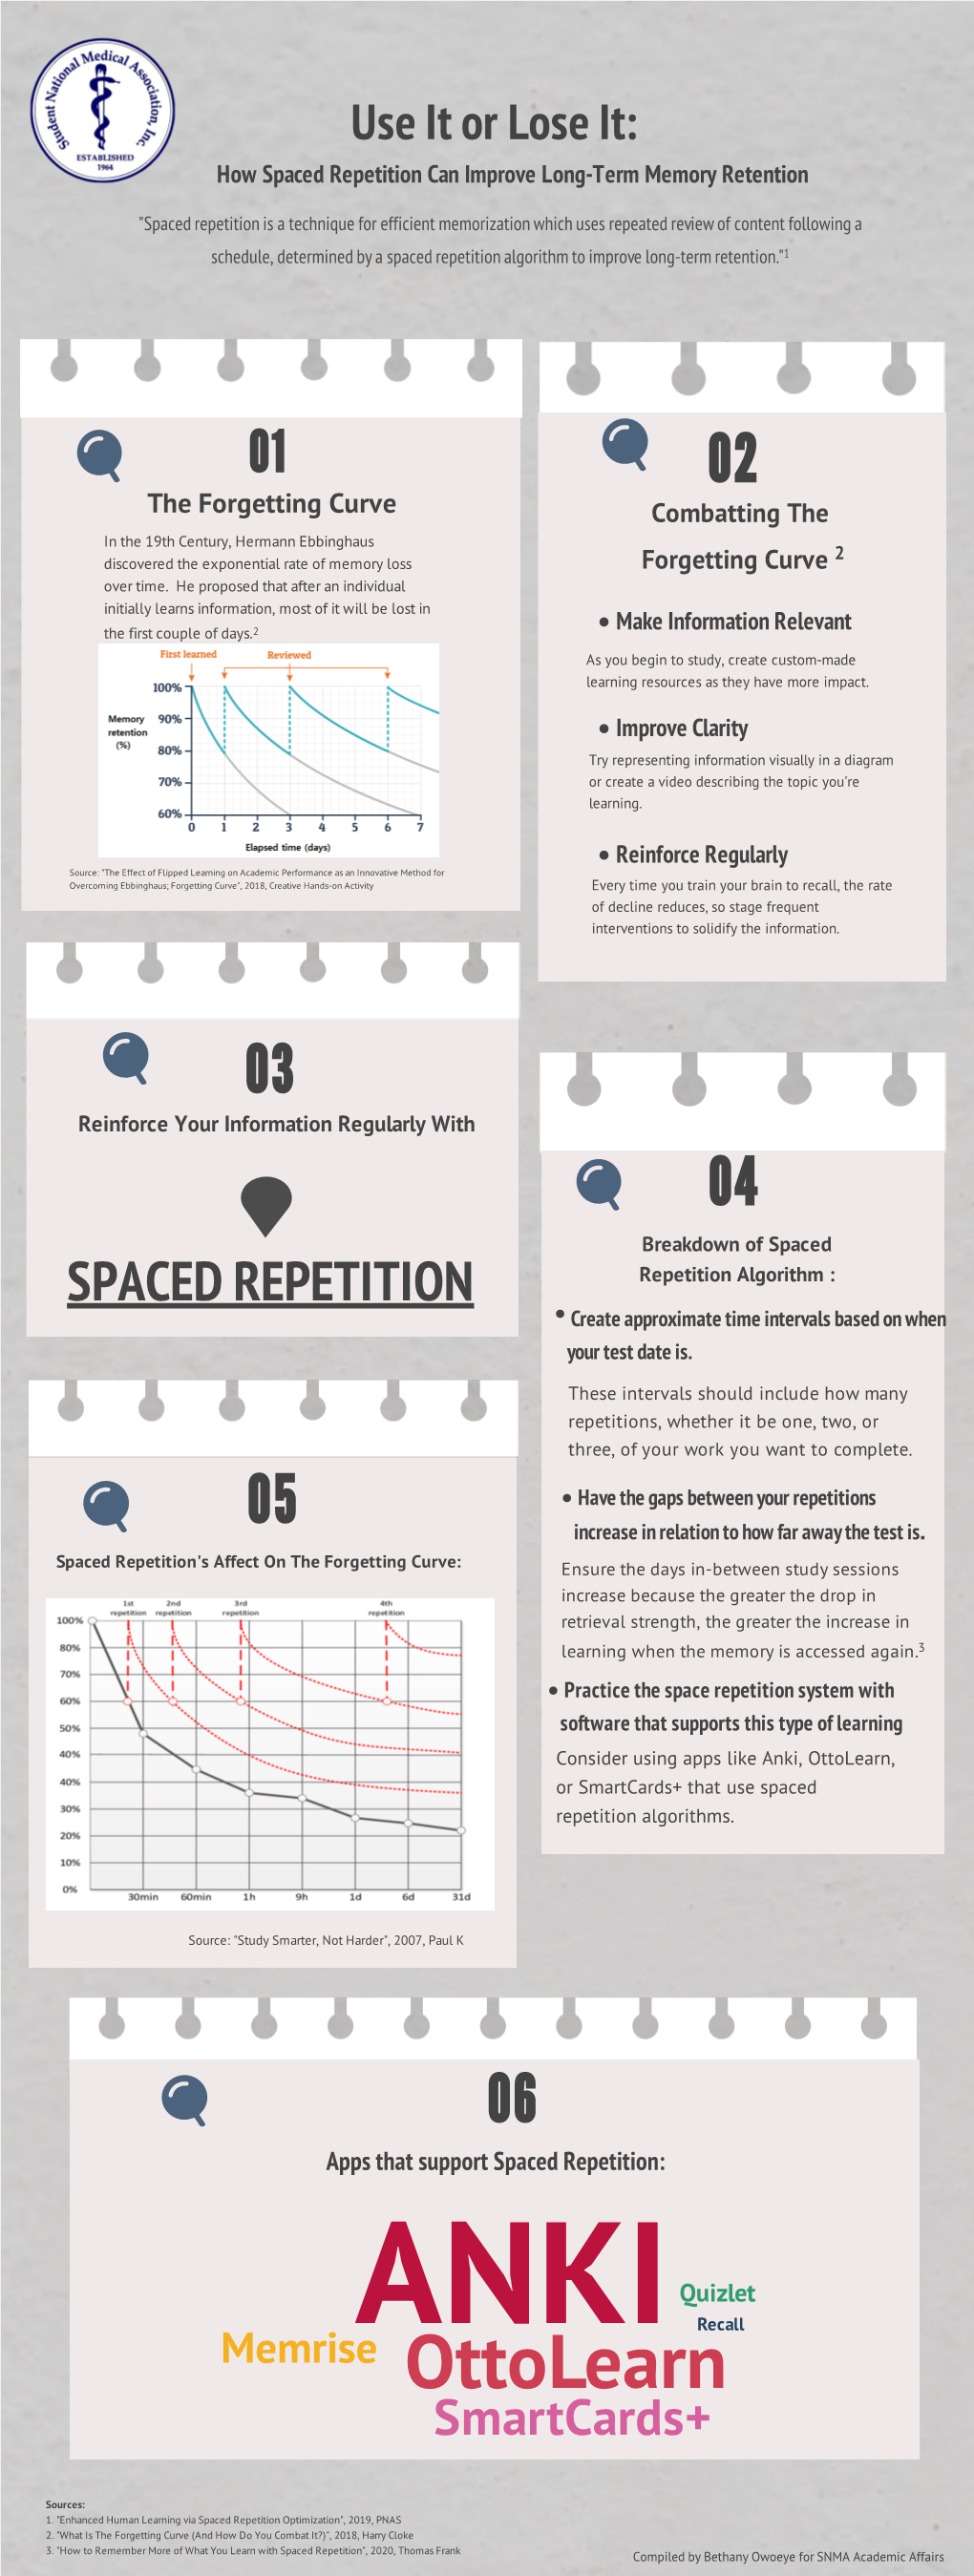 Spaced Repetition Can Improve Long-Term Memory Retention